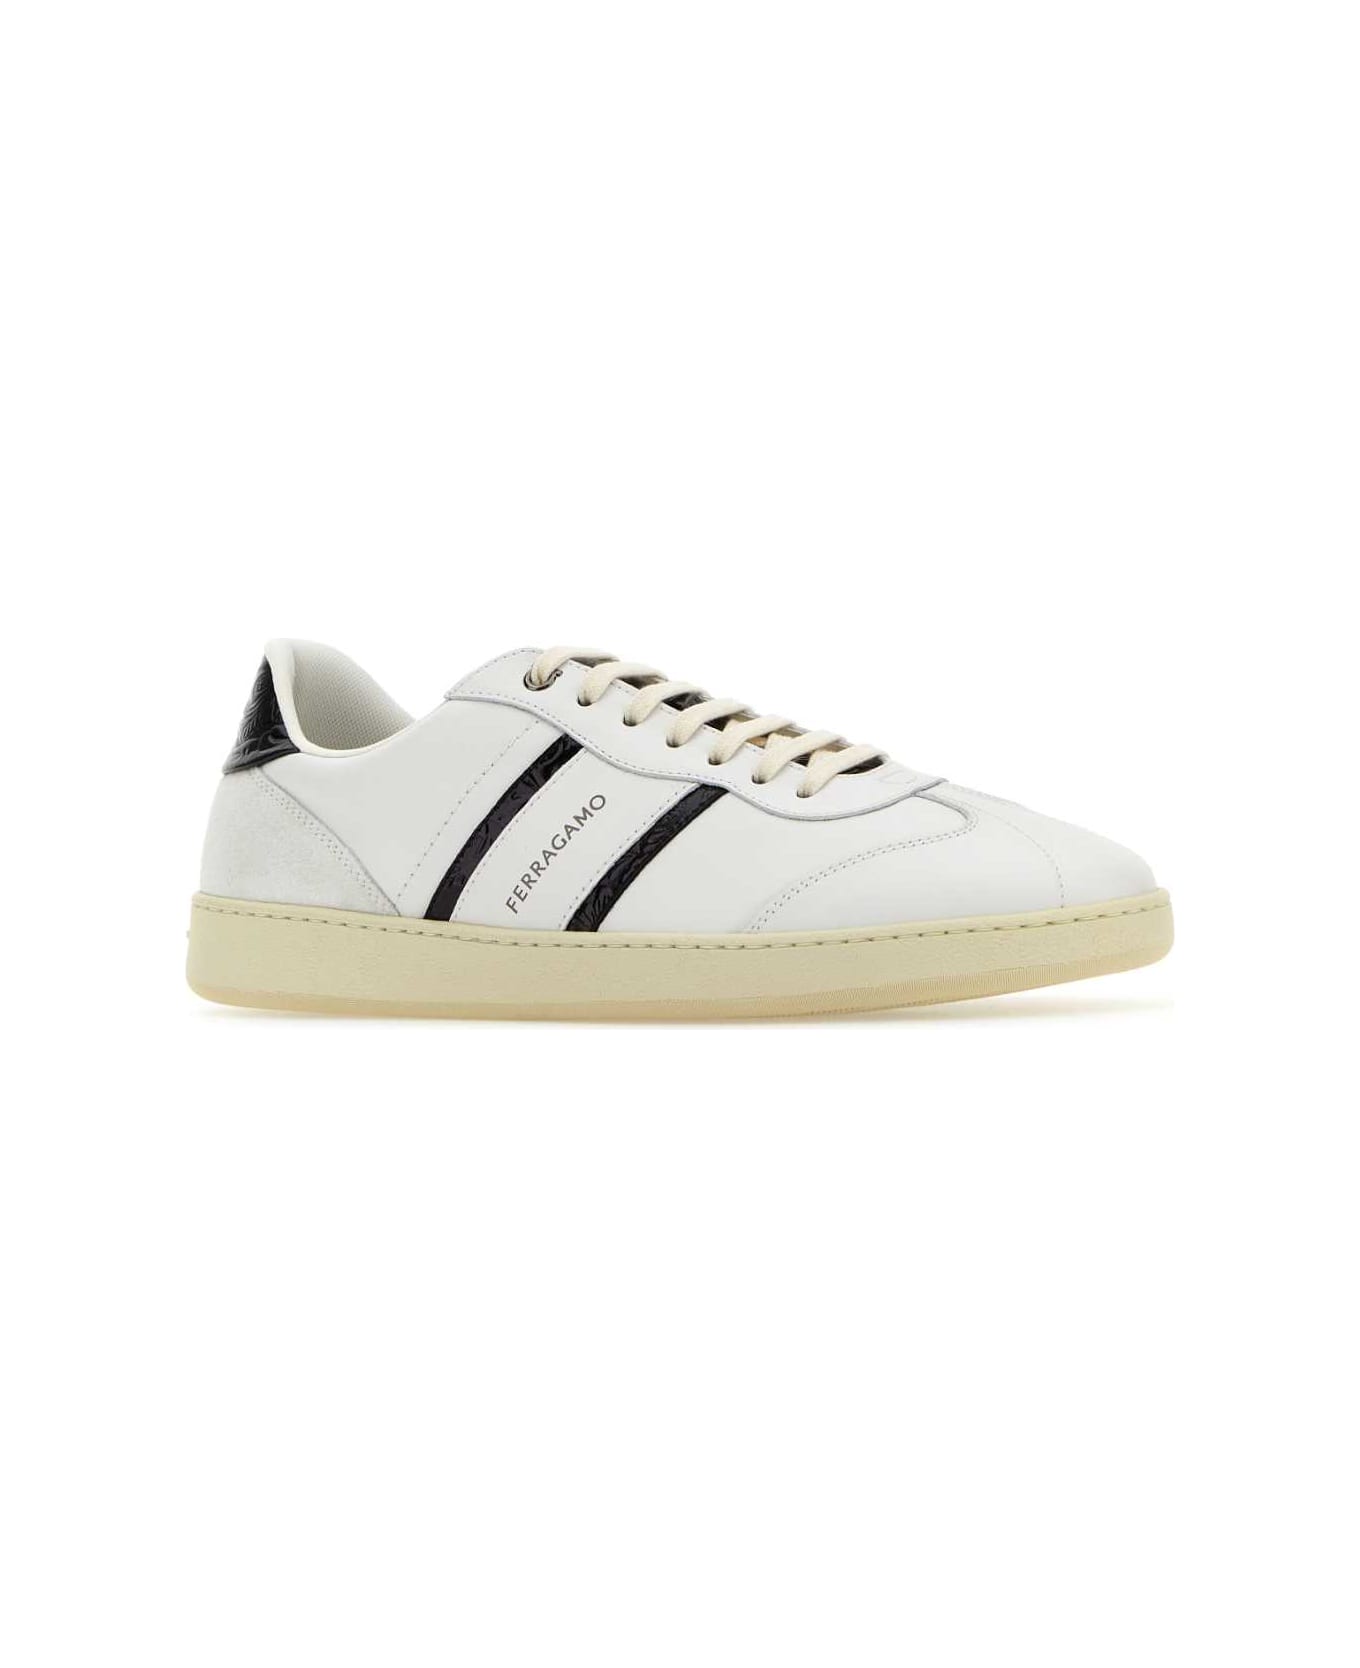 Ferragamo White Leather And Suede Sneakers - BIANCOOTTICO スニーカー